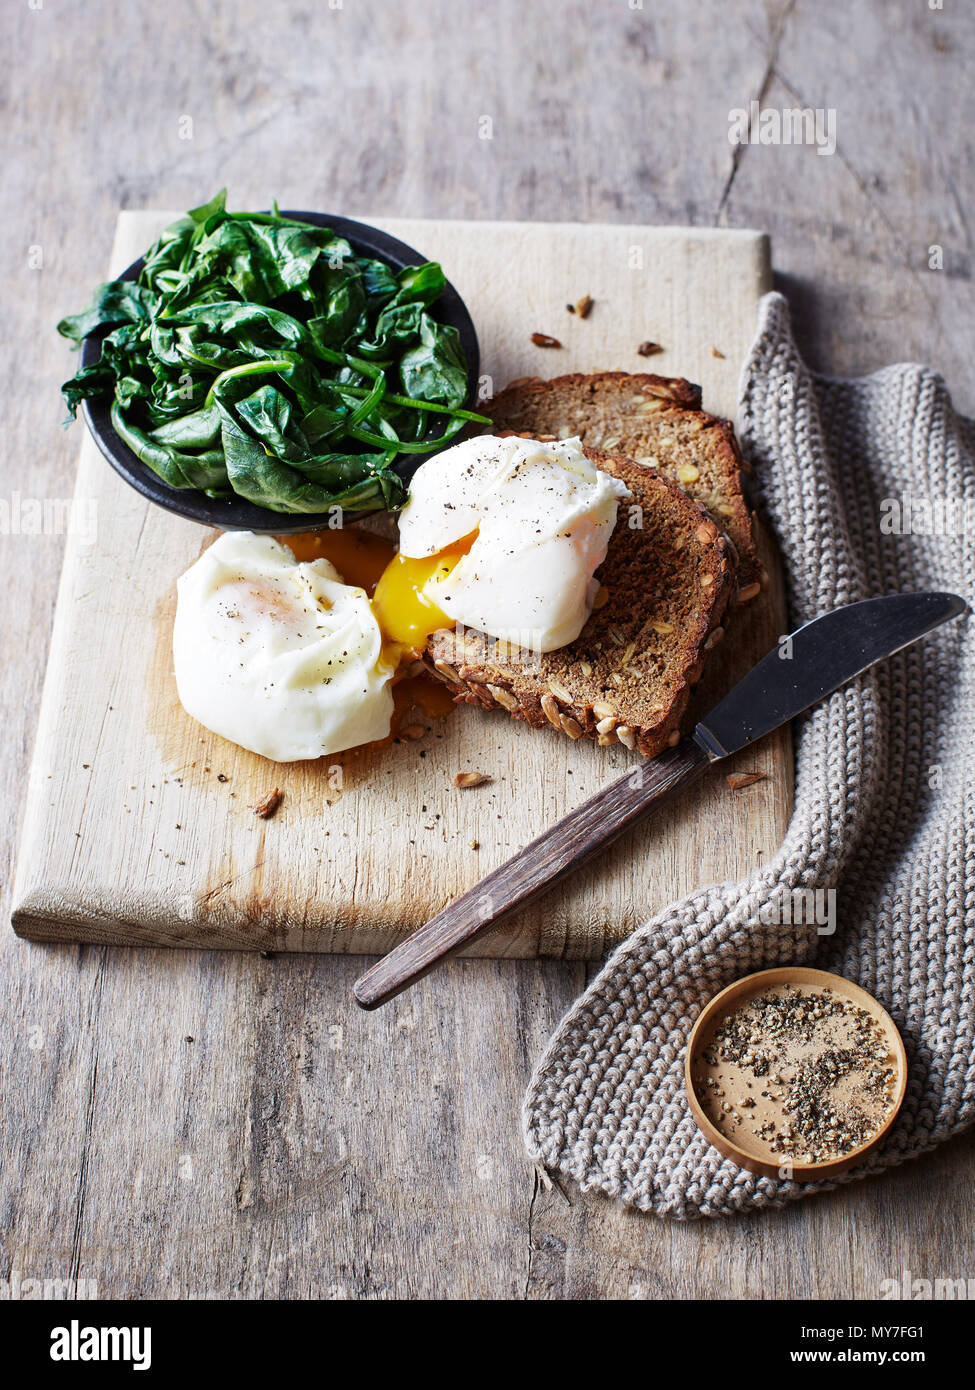 Still life with spinach and poached egg on toast on chopping board, overhead view Stock Photo